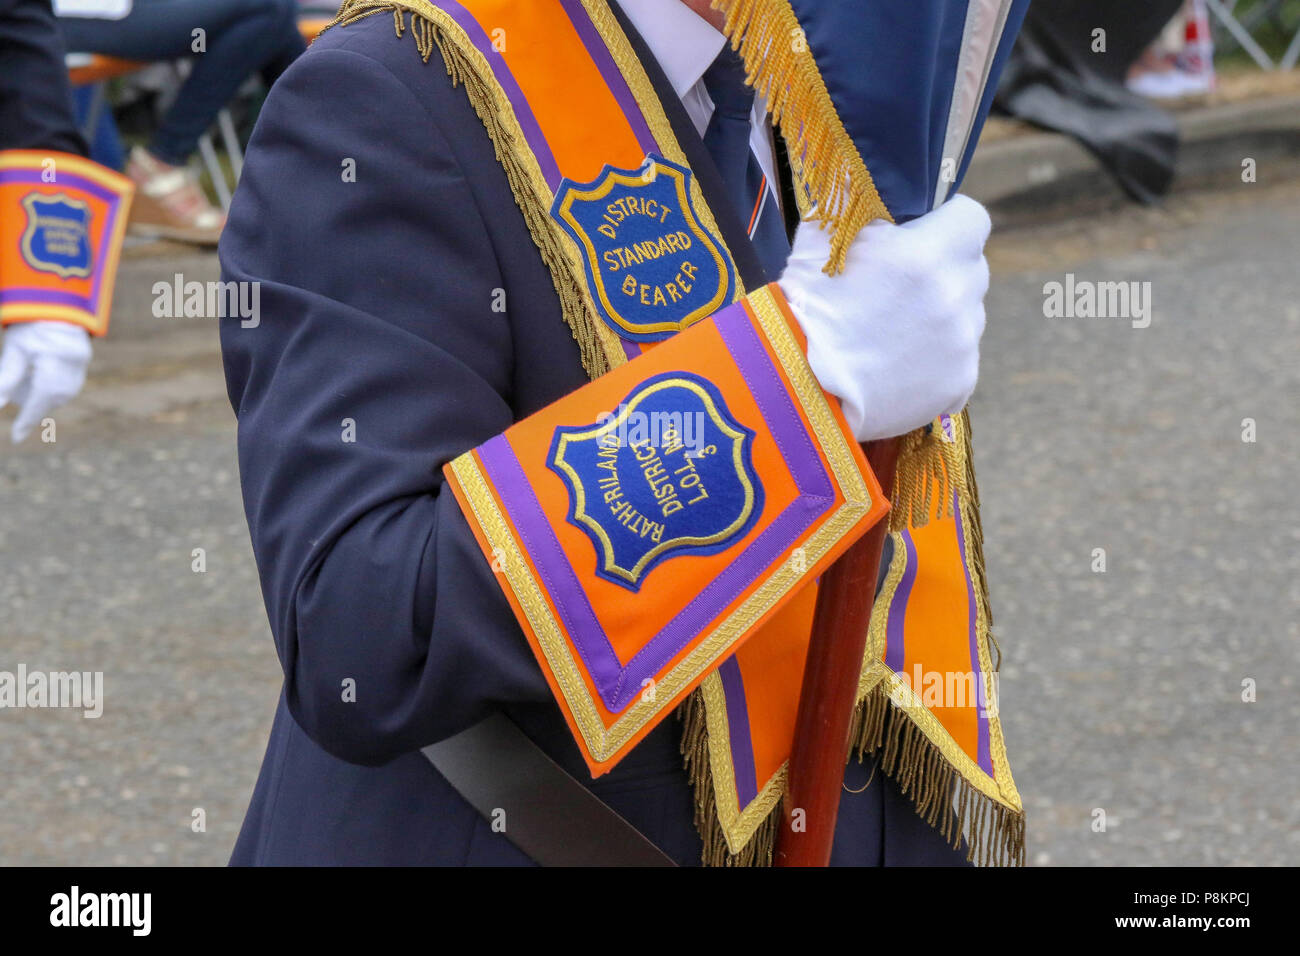 Donaghcloney, County Down, Northern Ireland.12 July 2018. Orange order parade on 12th July in Northern Ireland. The Twelfth of July is marked by Orange Order parades across Northern Ireland. The largest parade in County Down this year was at Donaghcloney. Thousands turned out to see the parade through the village. The parades across Northern Ireland mark the victory of William of Orange over James at the Battle of the Boyne in 1690. Thousands turned out to watch the colourful parade at Donaghcloney. Credit: CAZIMB/Alamy Live News. Stock Photo